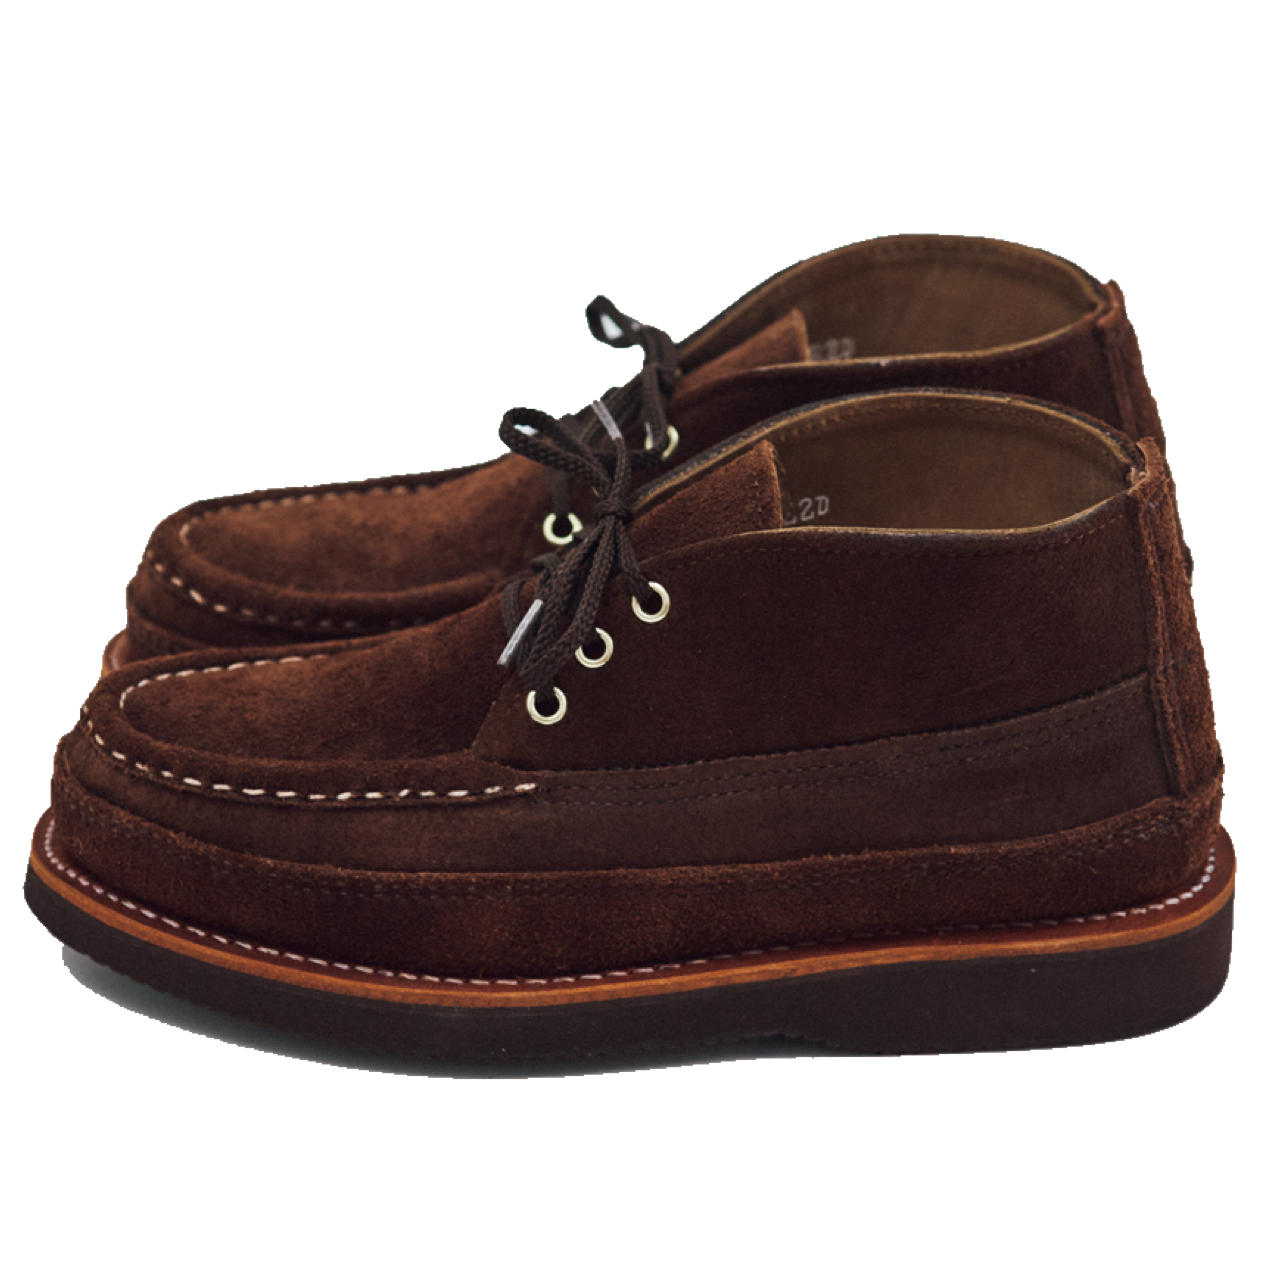 Russell Moccasinのモカシン